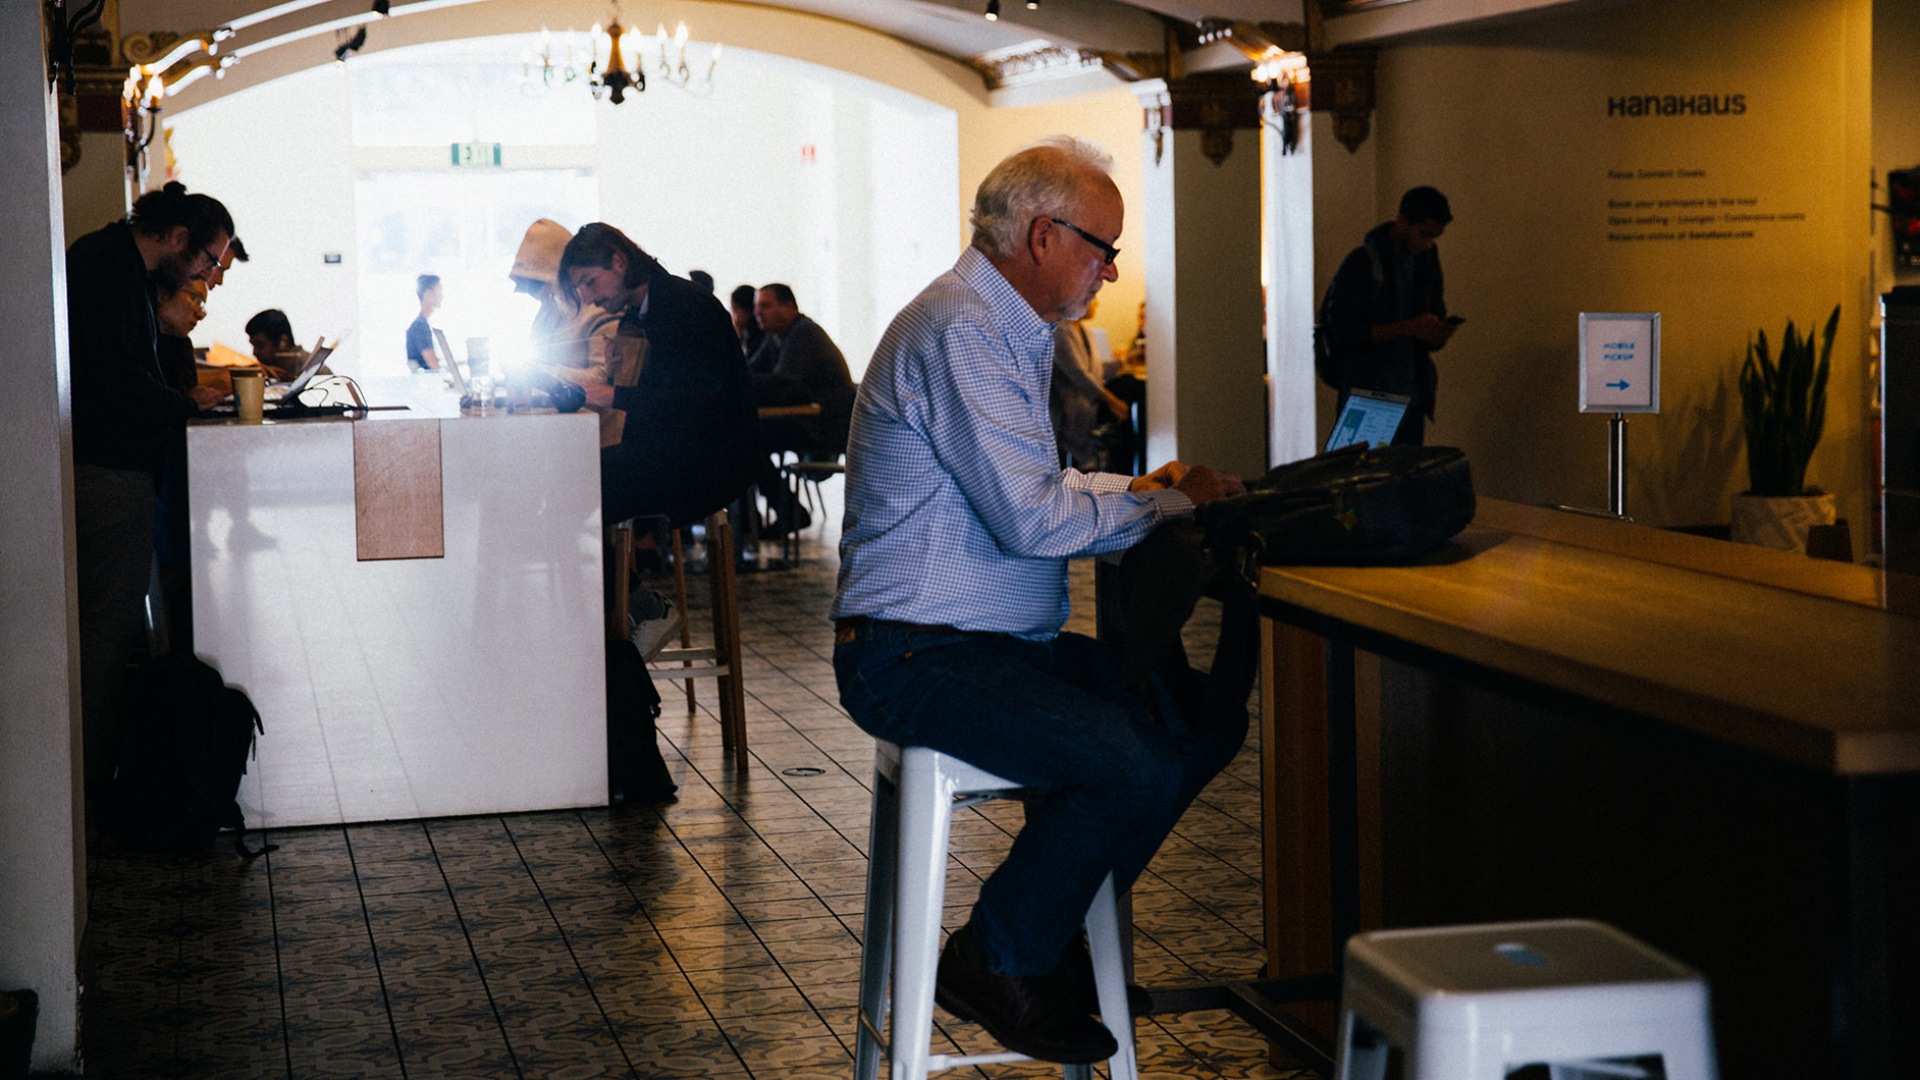 man sitting at a cafe